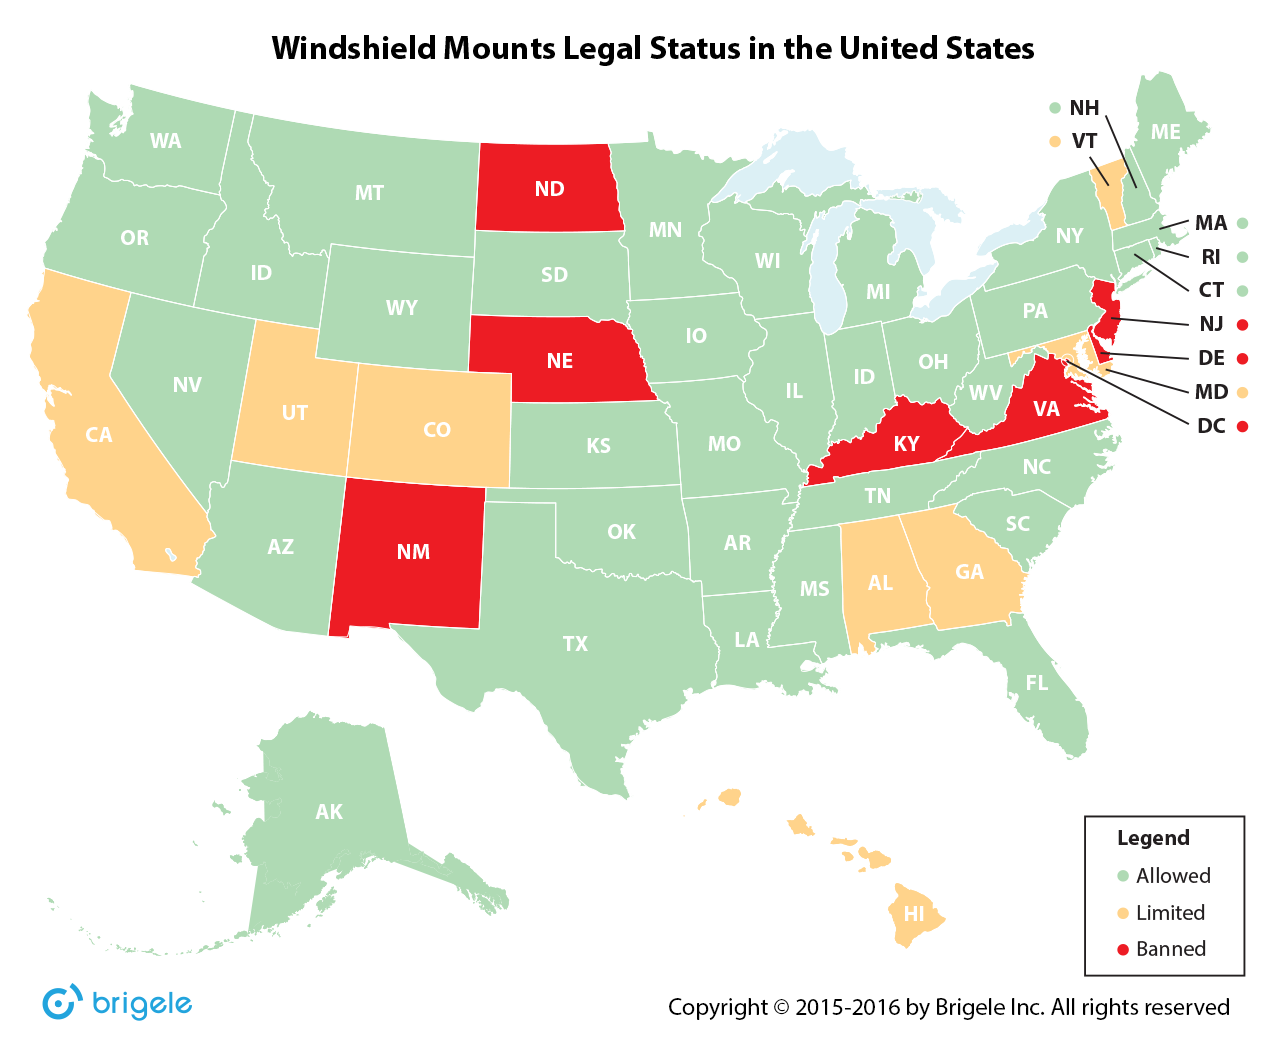 Windshield mounts legal status in the US - map